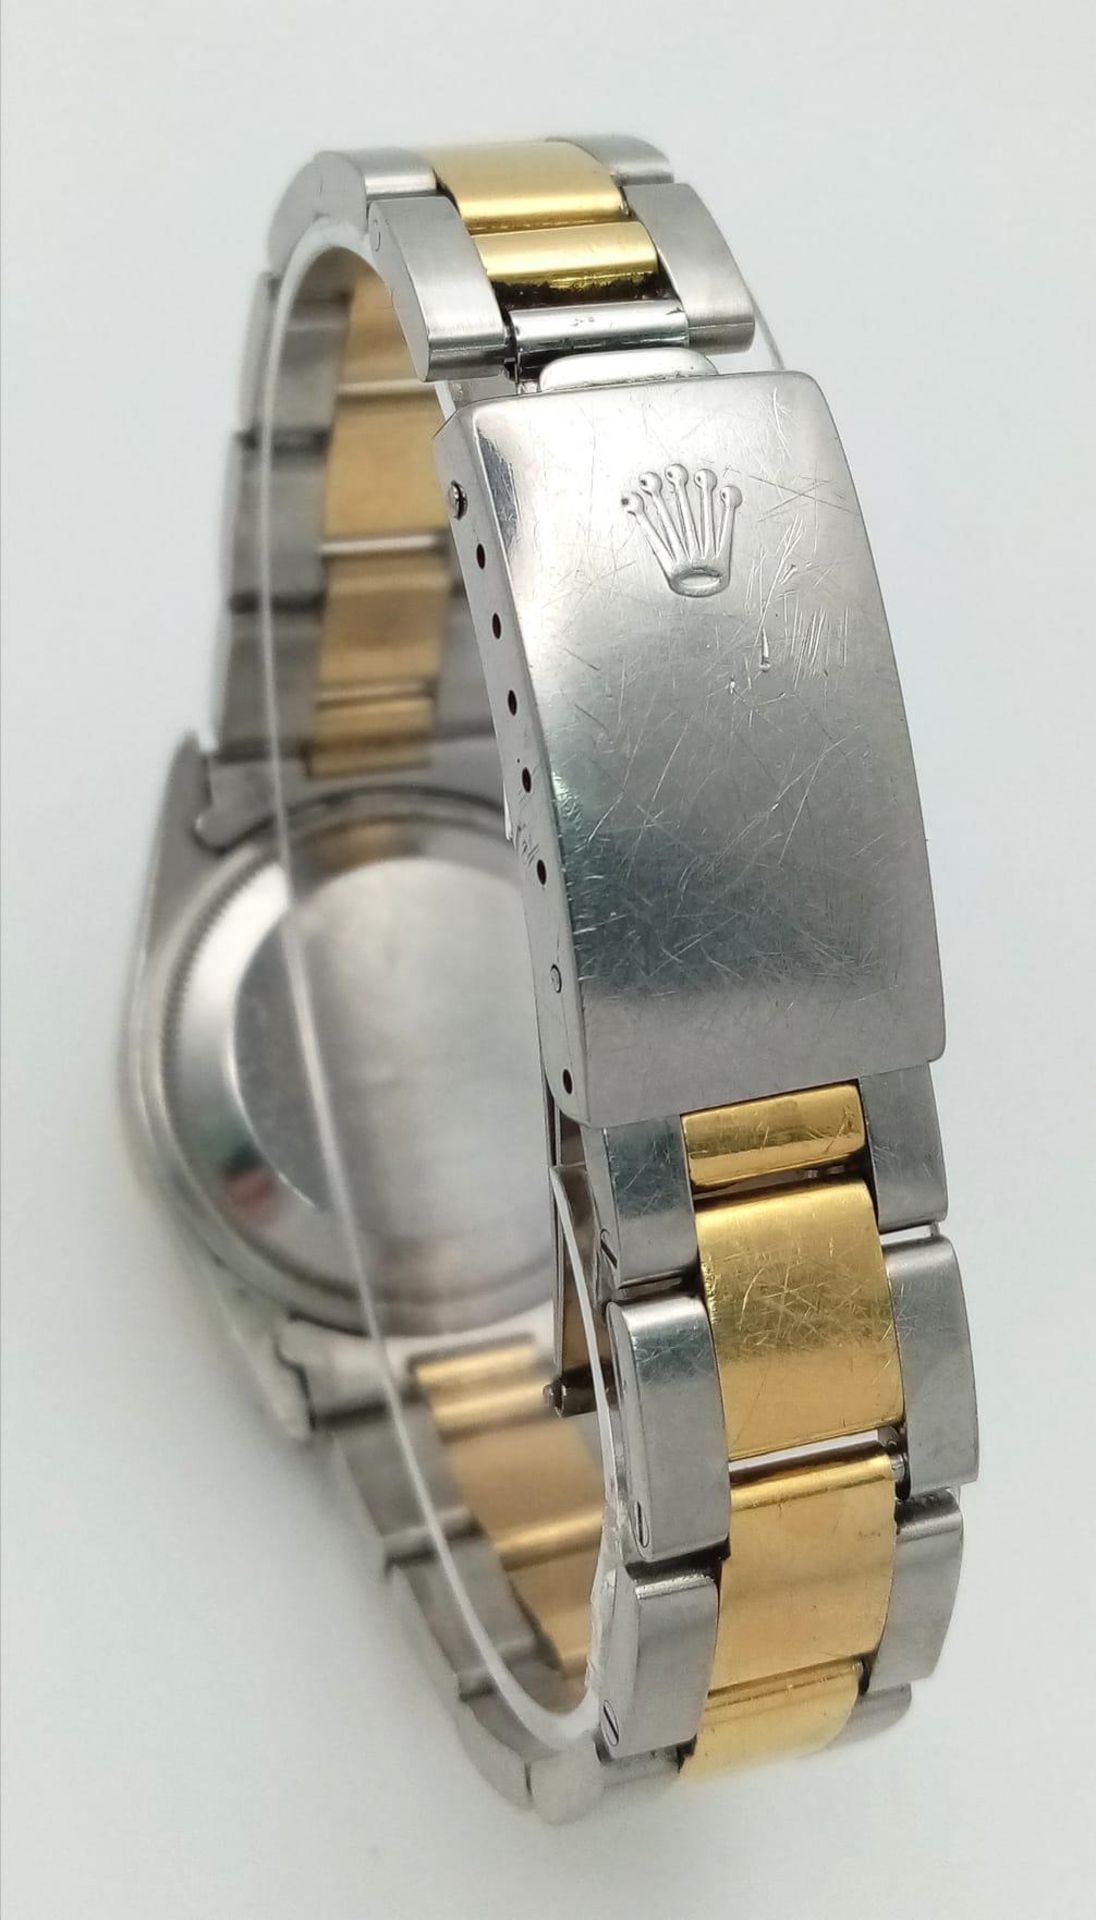 THE CLASSIC ROLEX OYSTER PERPETUAL DATE AUTOMATIC BI-METAL GENTS WATCH WITH TASTEFUL SILVERTONE DIAL - Image 11 of 19